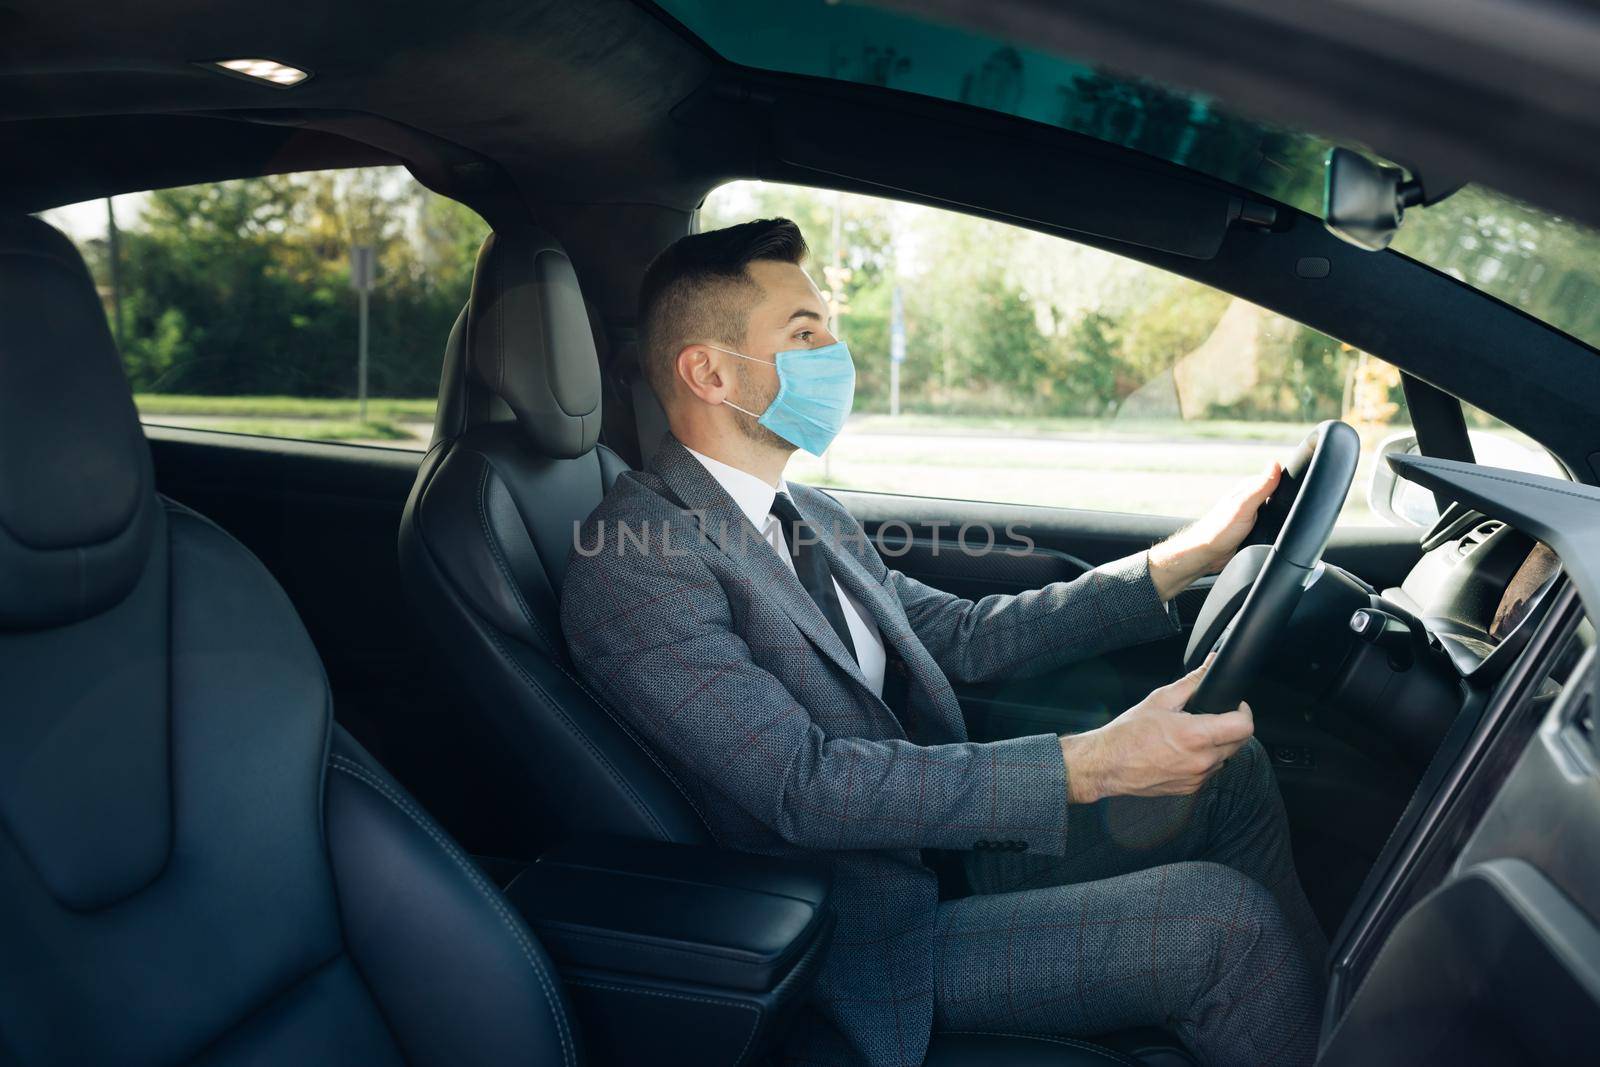 Pandemic. Citizens. Lockdown safety. Adult businessman wearing medical mask in prevention for coronavirus and driving his car to work. Businessman healthcare by uflypro